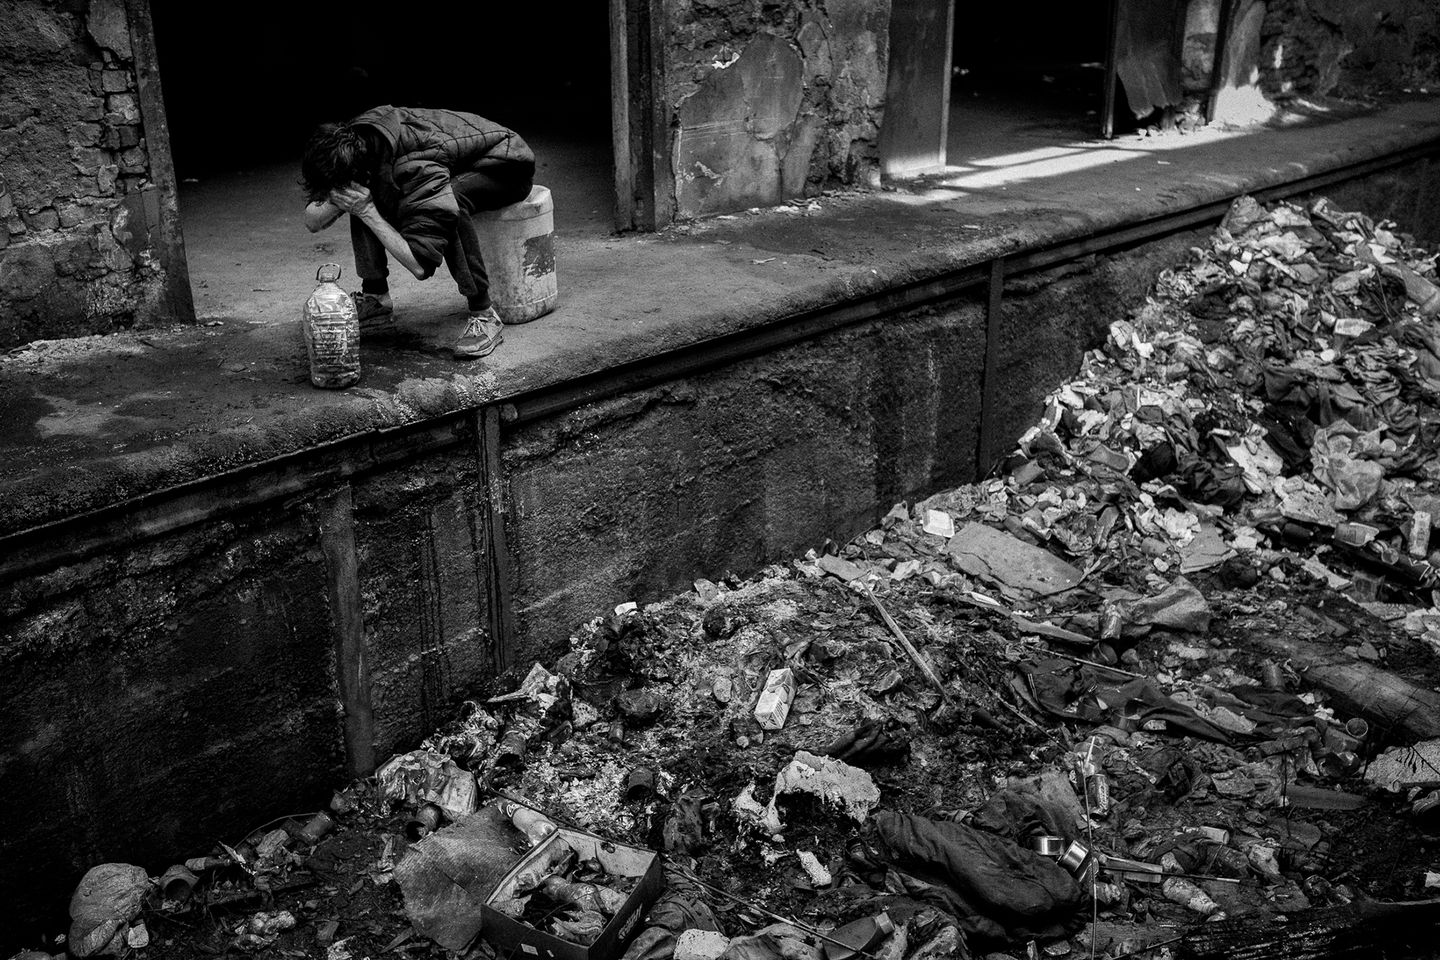 Stuck at Belgrade Station: Photos show deplorable conditions migrants and refugees are left living in – The Washington Post